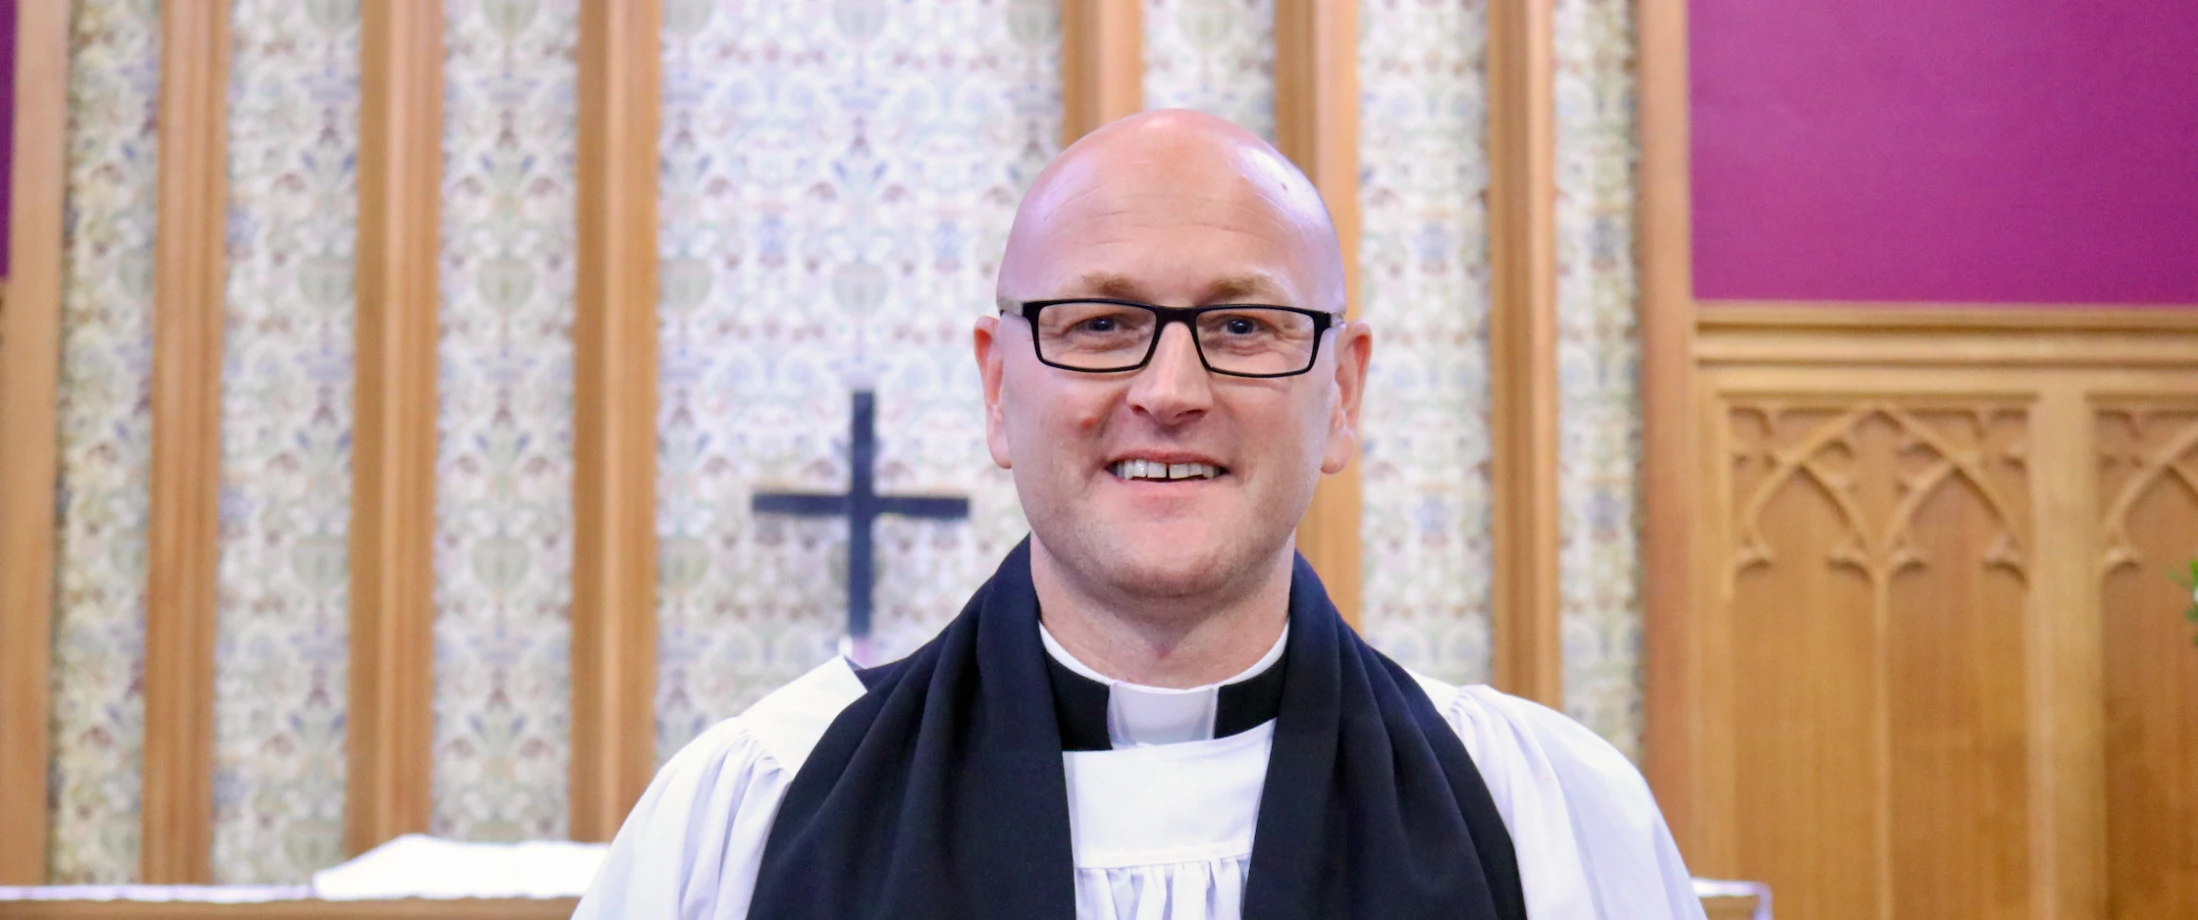 Ross Munro is ordained deacon (OLM)